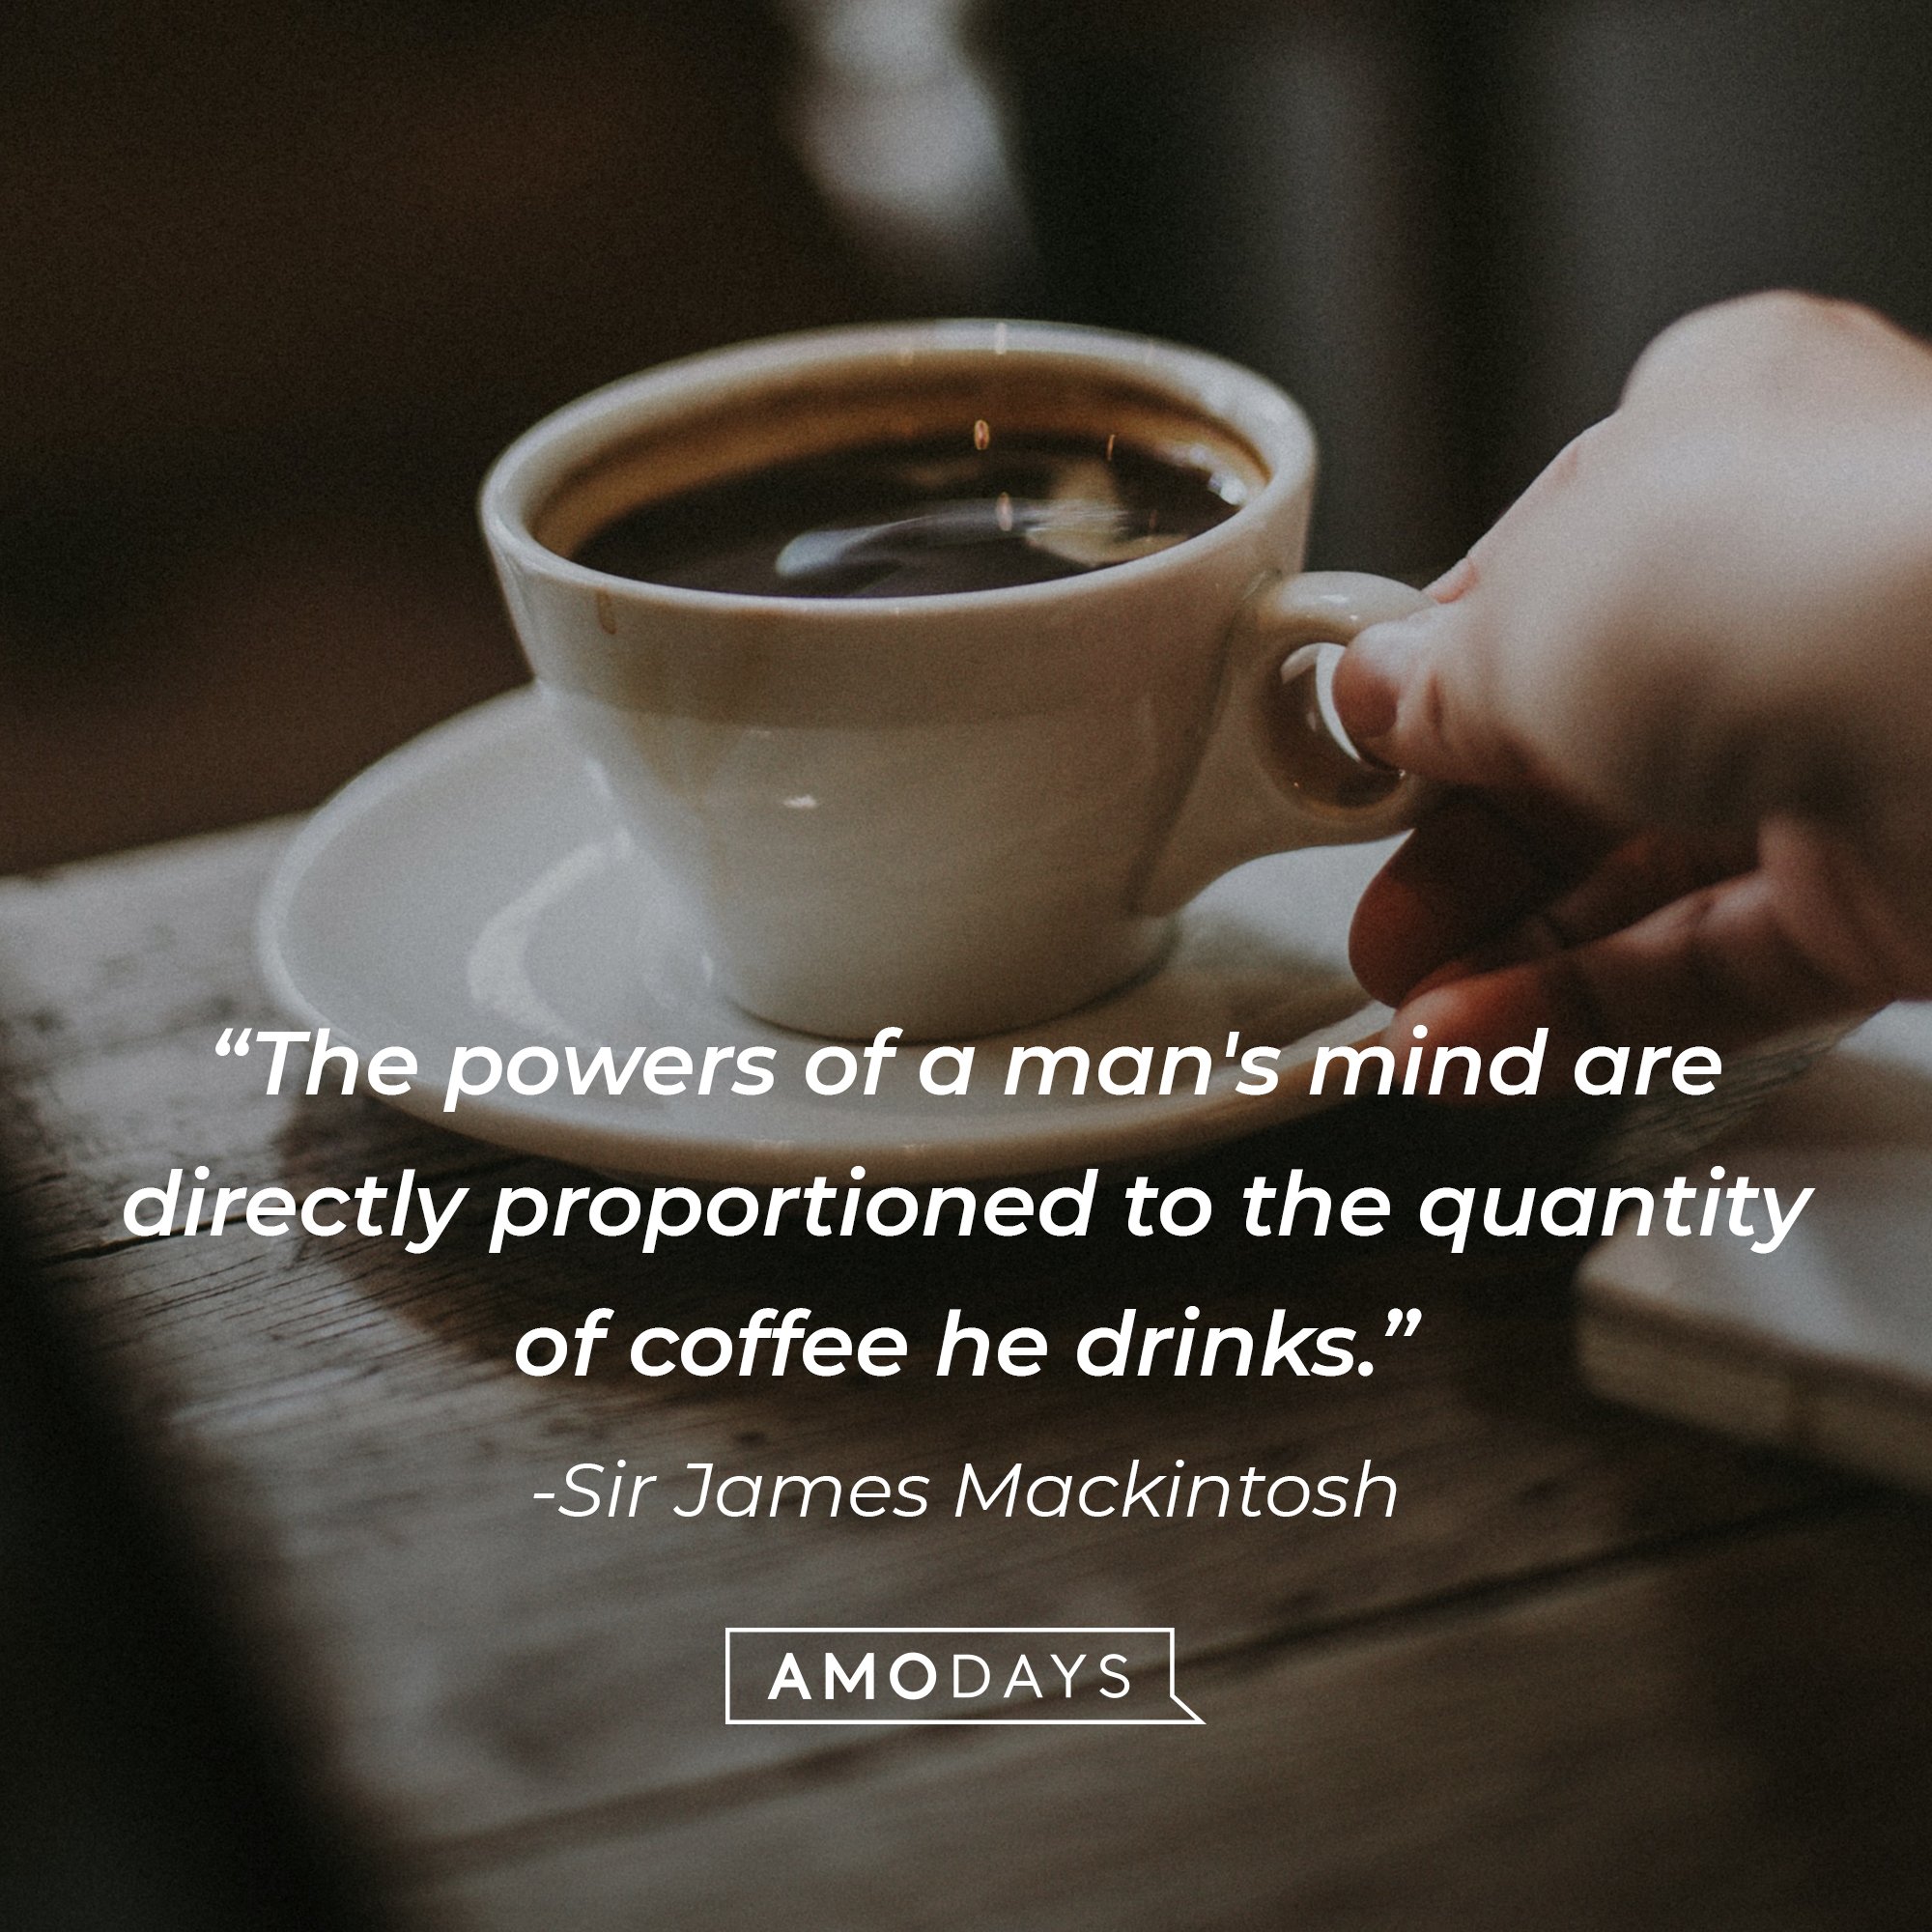 Sir James Mackintosh's quote: "The powers of a man's mind are directly proportioned to the quantity of coffee he drinks." | Image: AmoDays